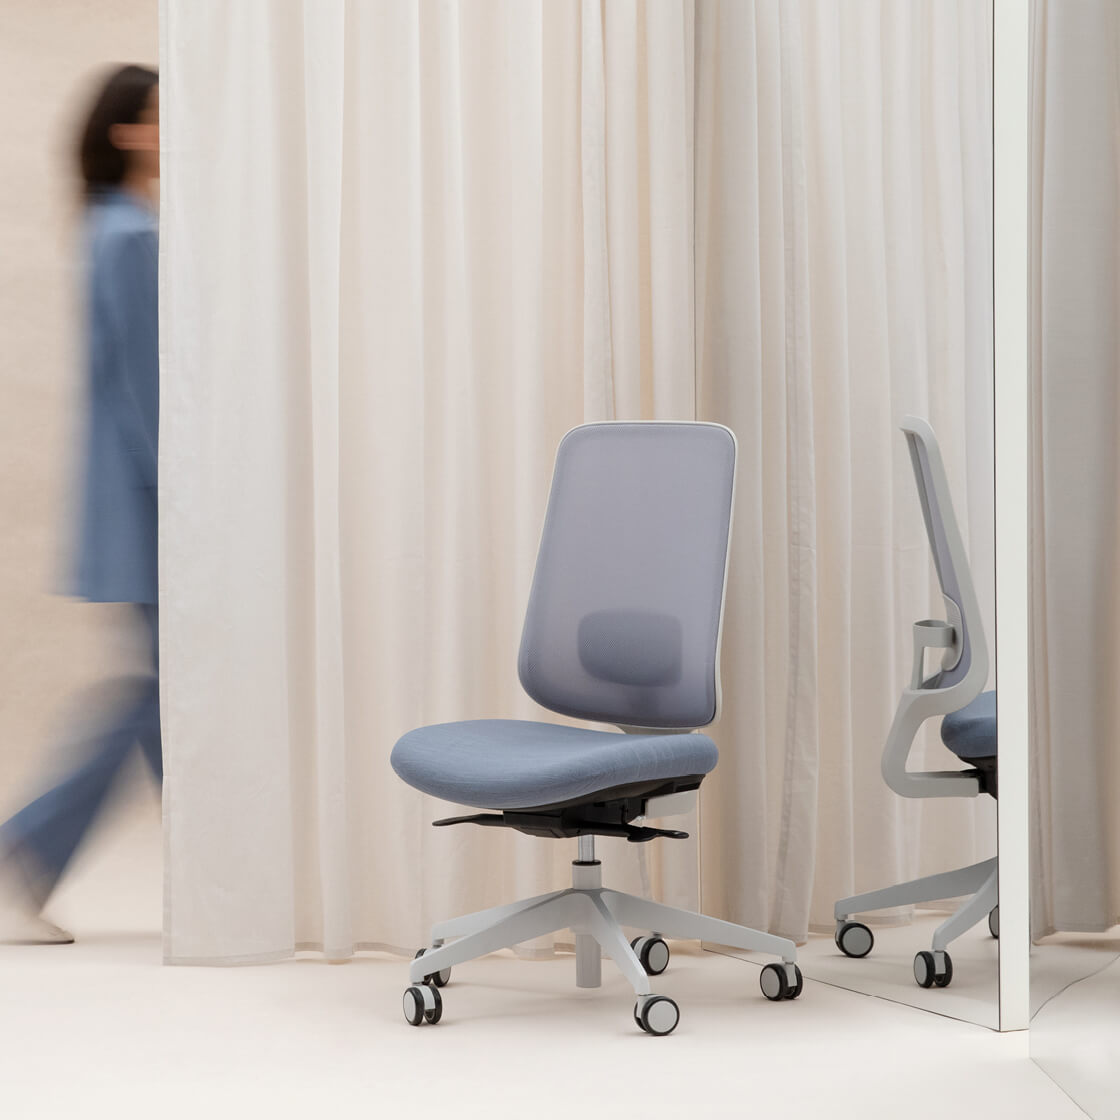 Task One Grey Frame Office Chair In Front Of A Mirror And Cream Curtain With Someone Walking Behind It